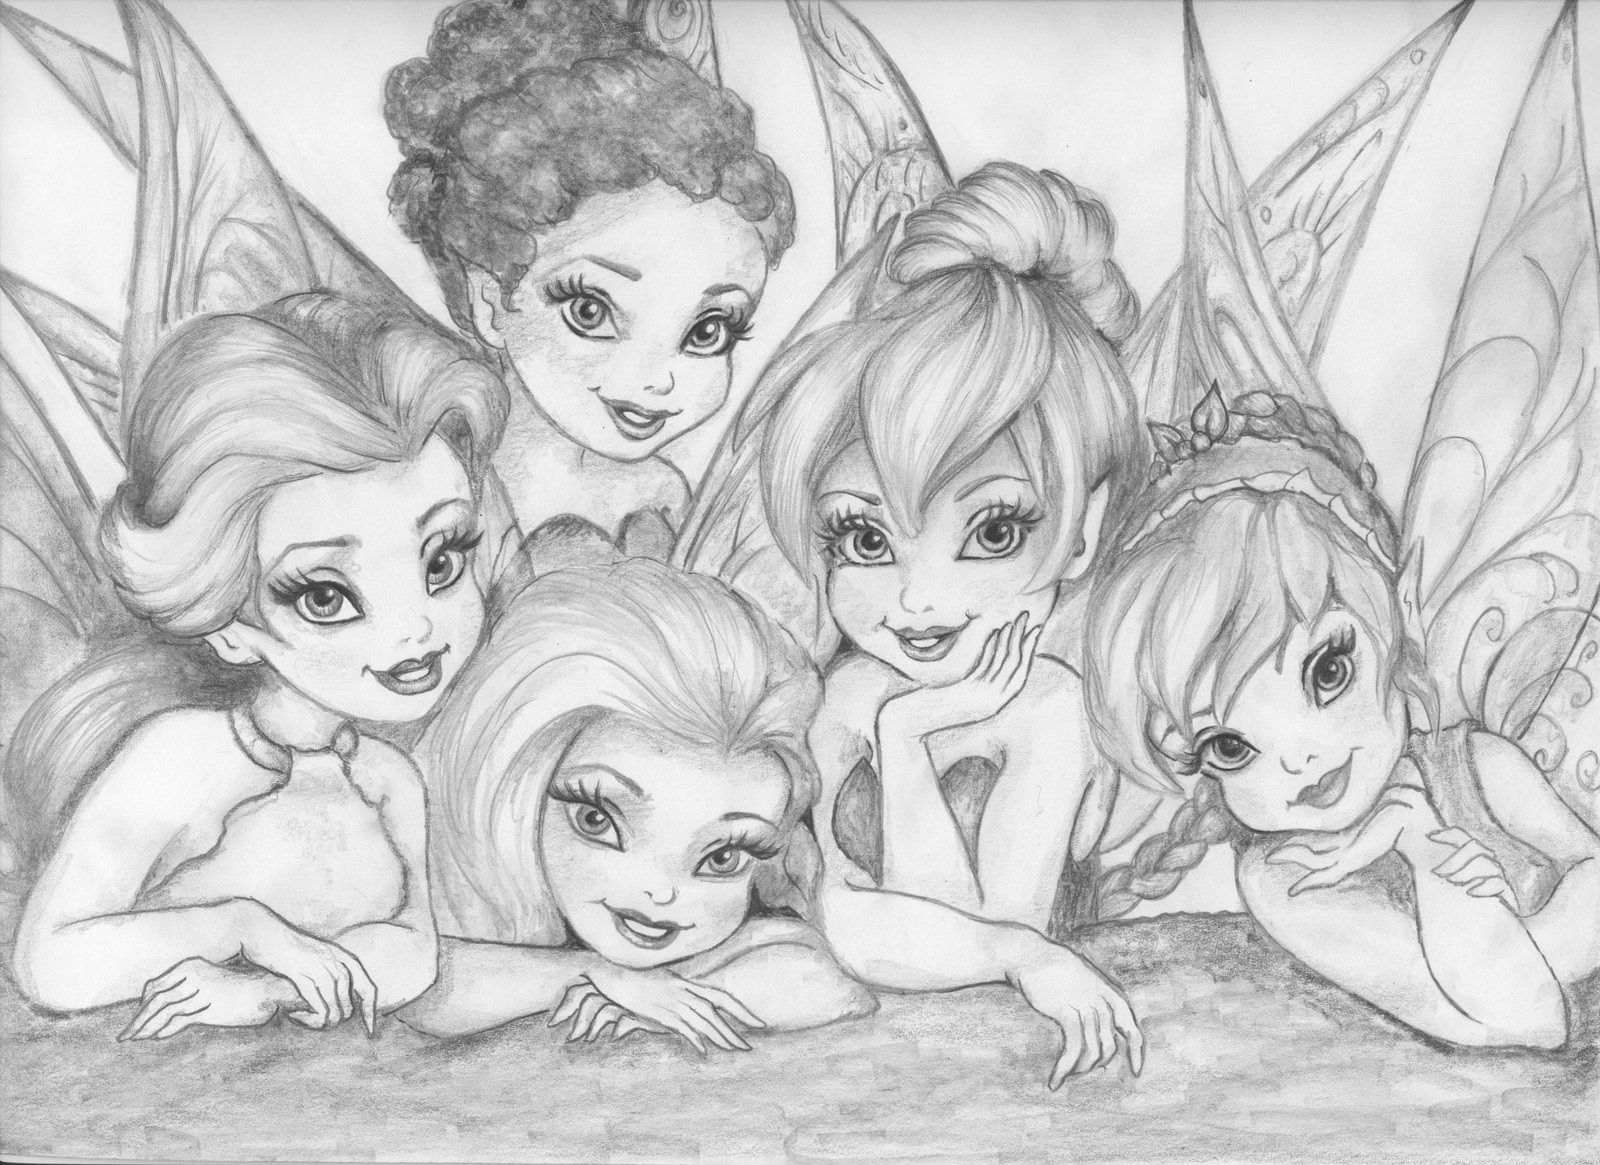 Pictures | Fairies, Cartoon and ...